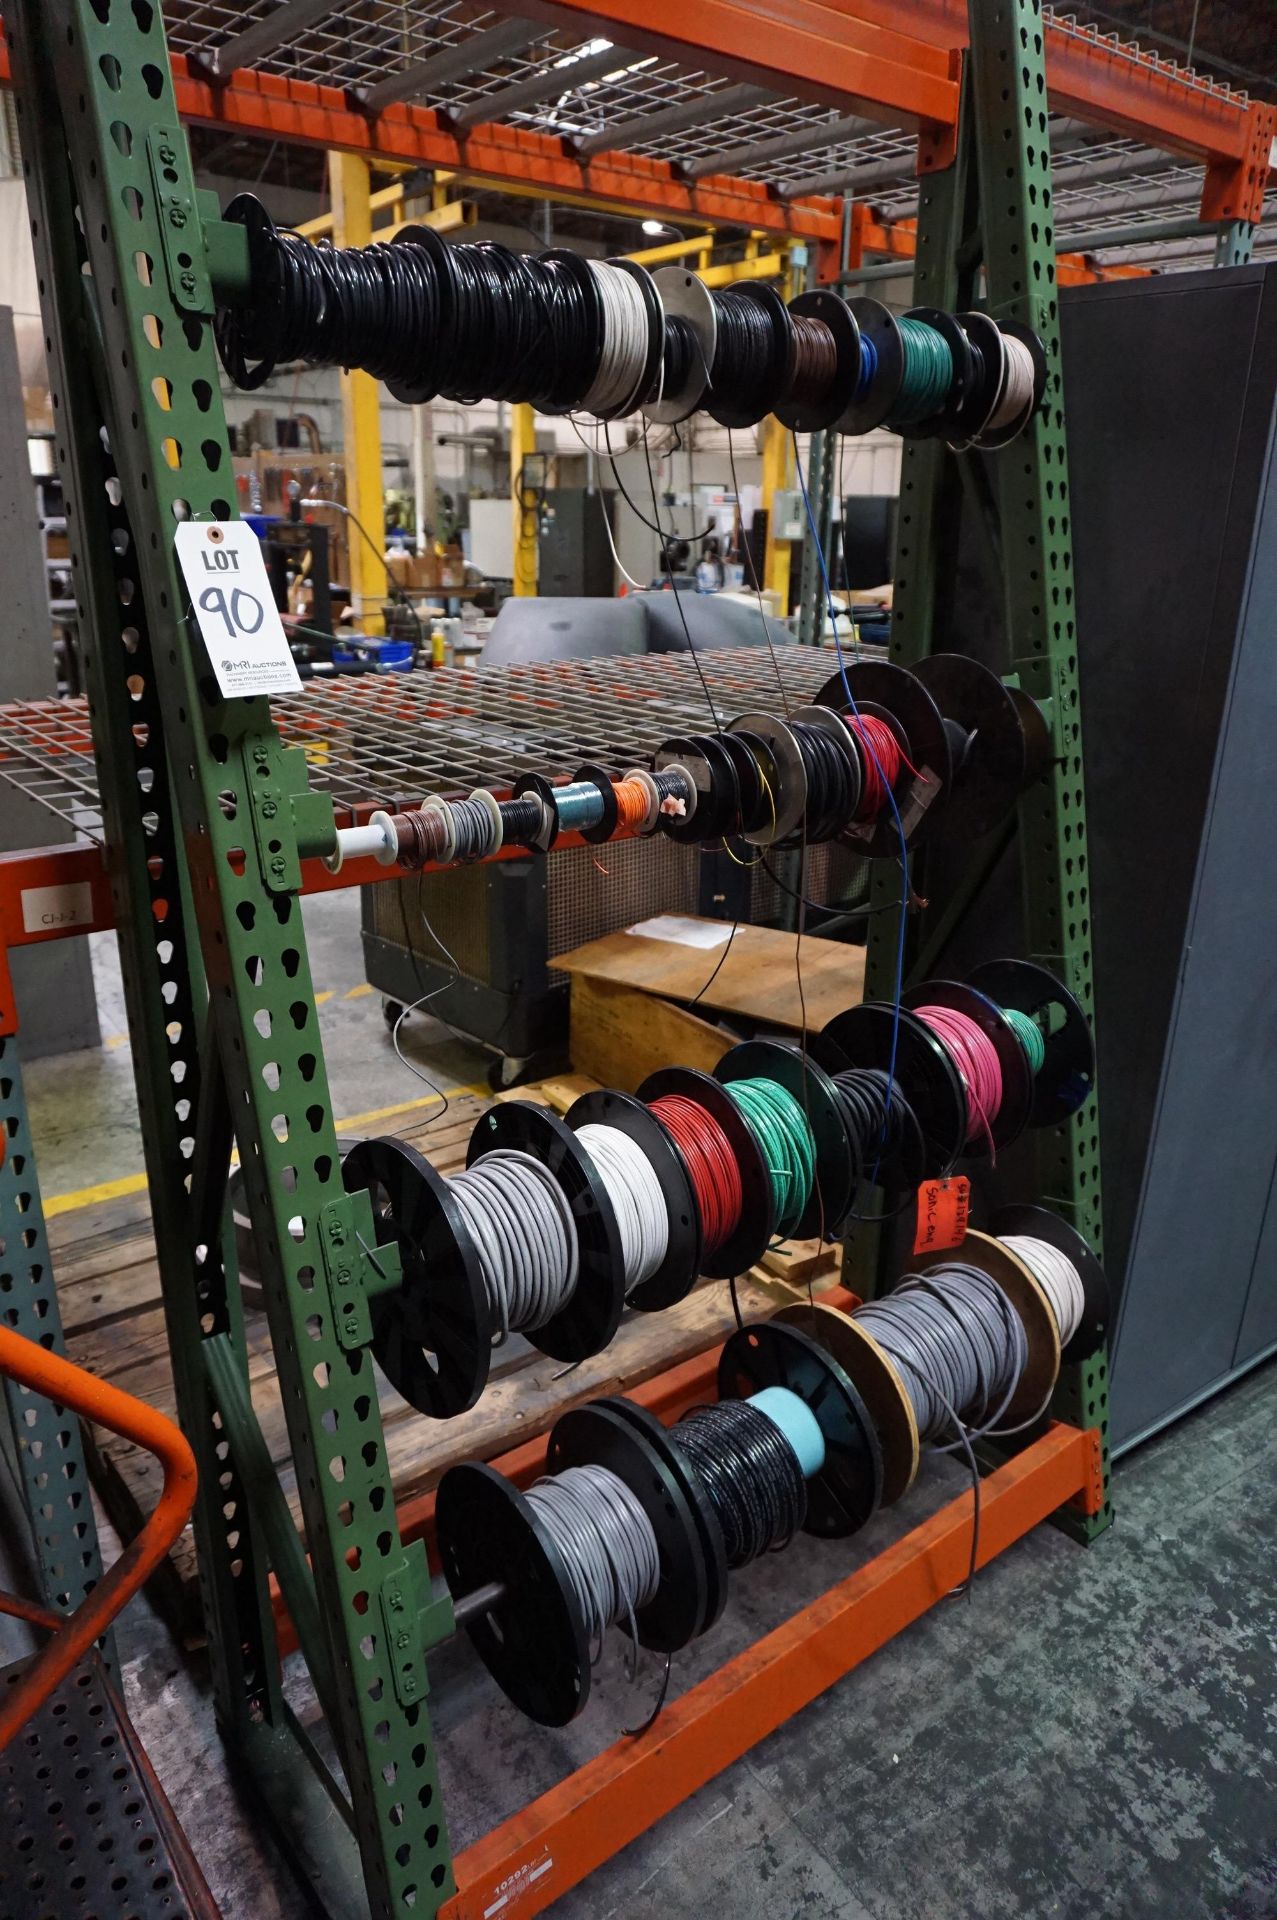 ADJUSTABLE STEEL RACK FOR WIRE SPOOLS WITH CONTENTS TO INCLUDE: SPOOLS OF WIRE, VARIED SIZES